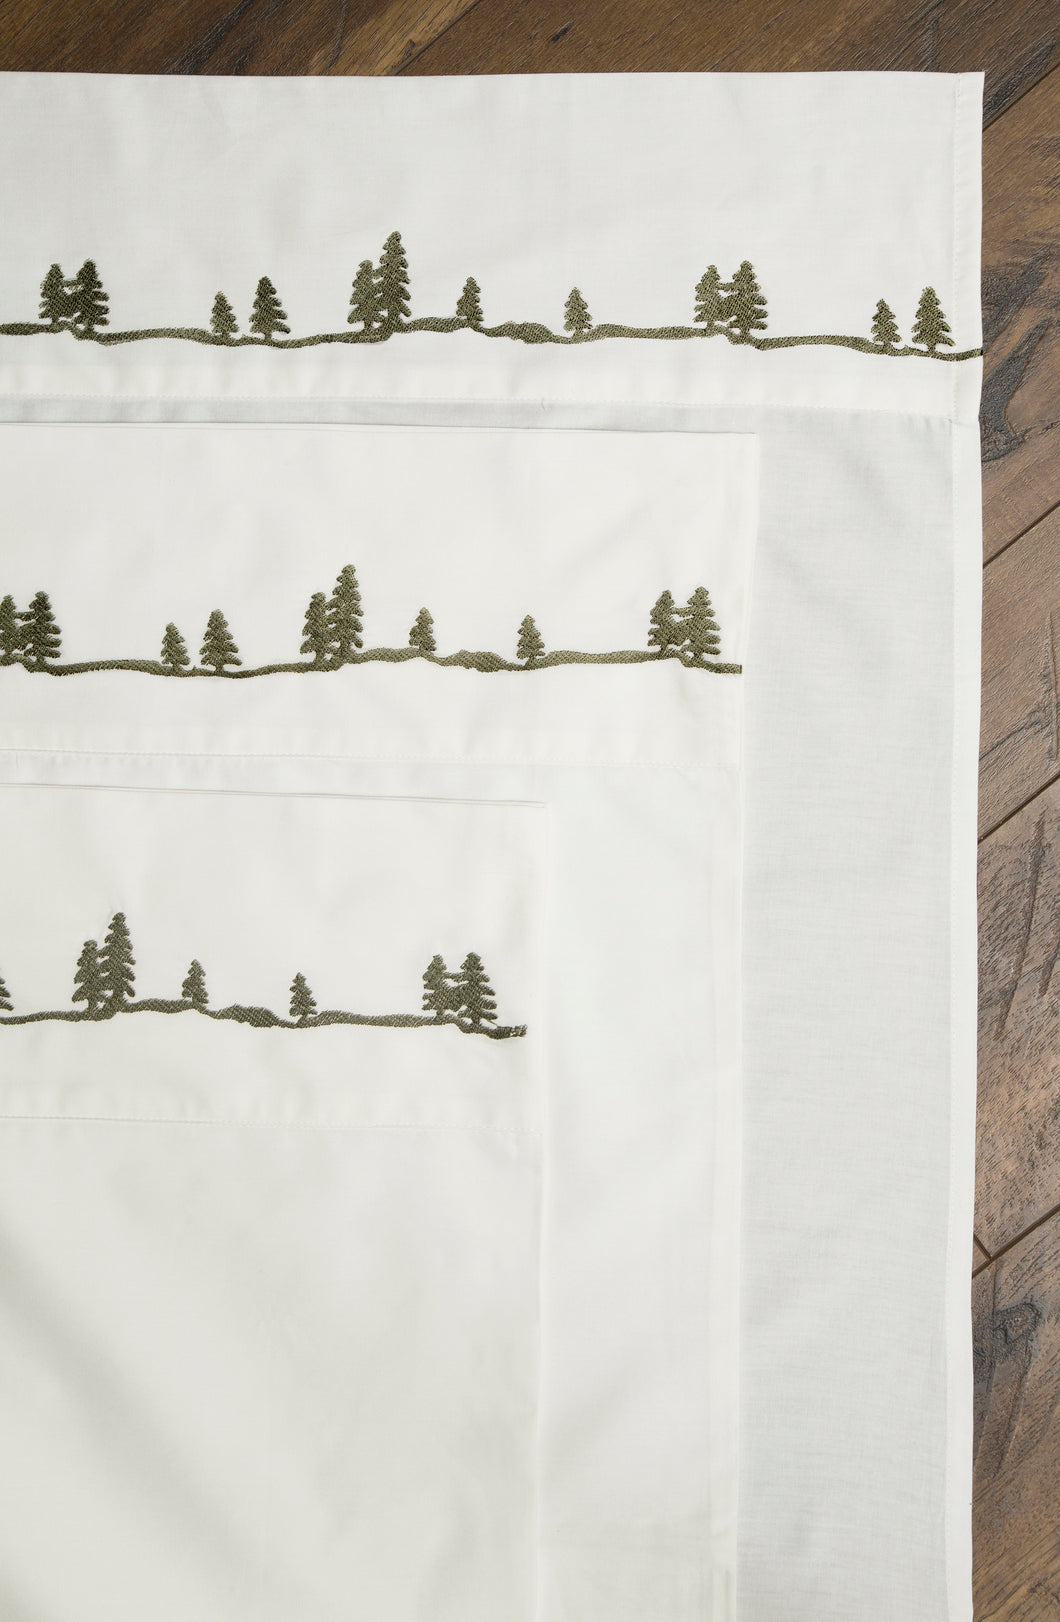 Carstens Embroidered Pines Rustic Sheet Set (Twin/Full/Queen/King)